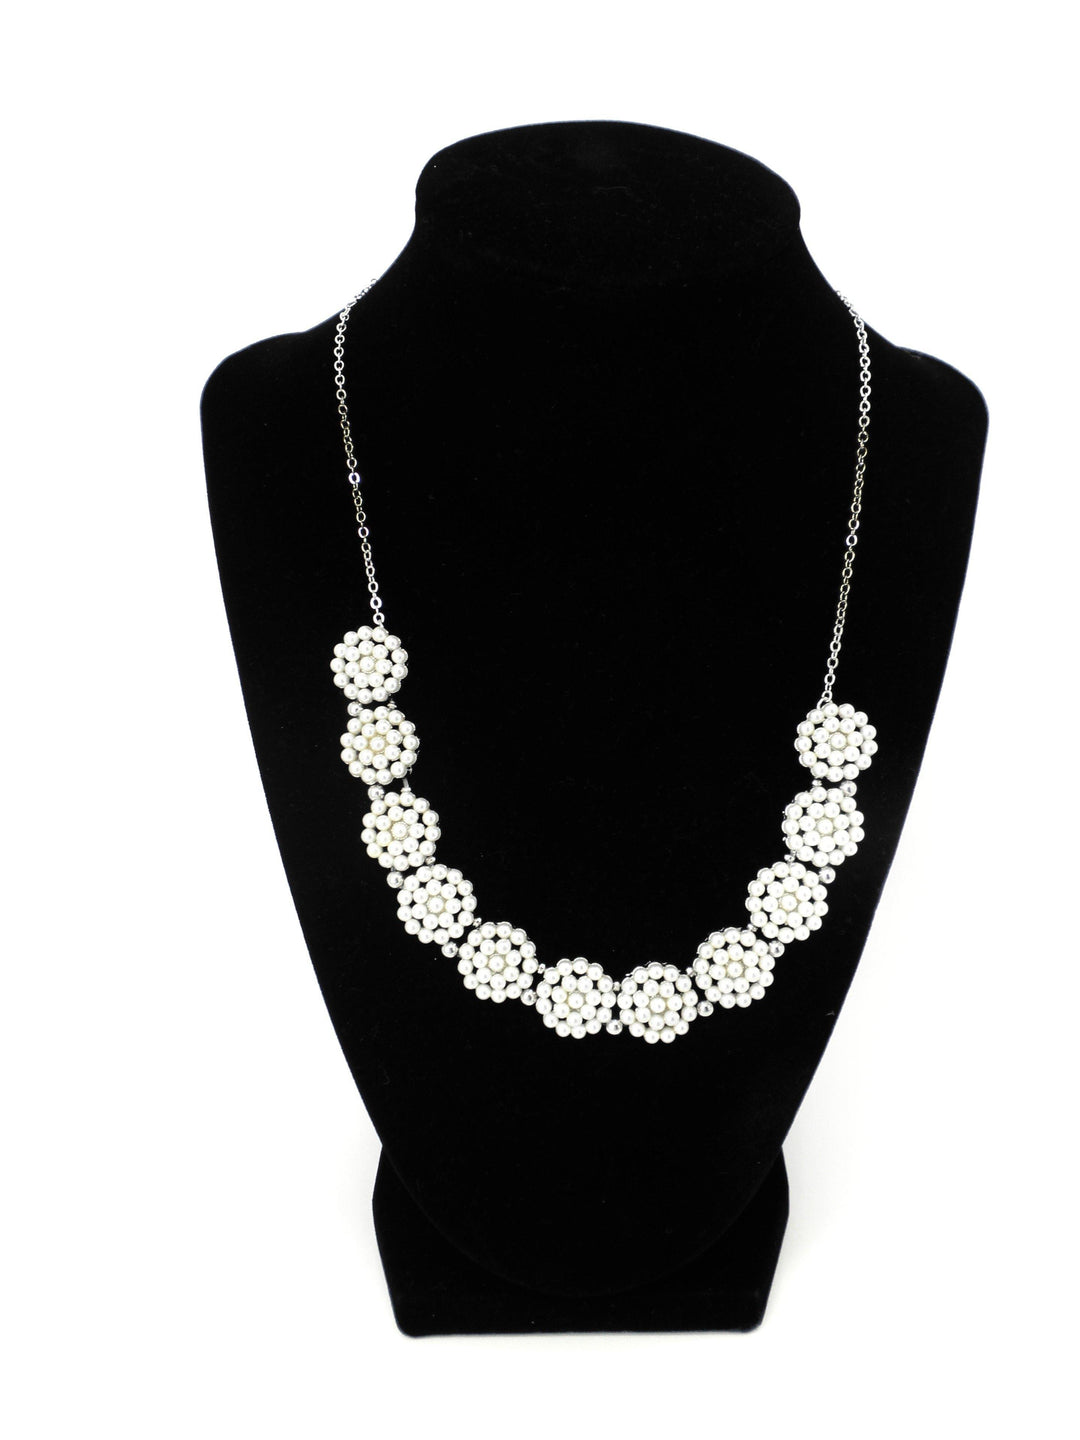 Silver Necklace with Pearl Clustered Design - The Fashion Foundation - {{ discount designer}}